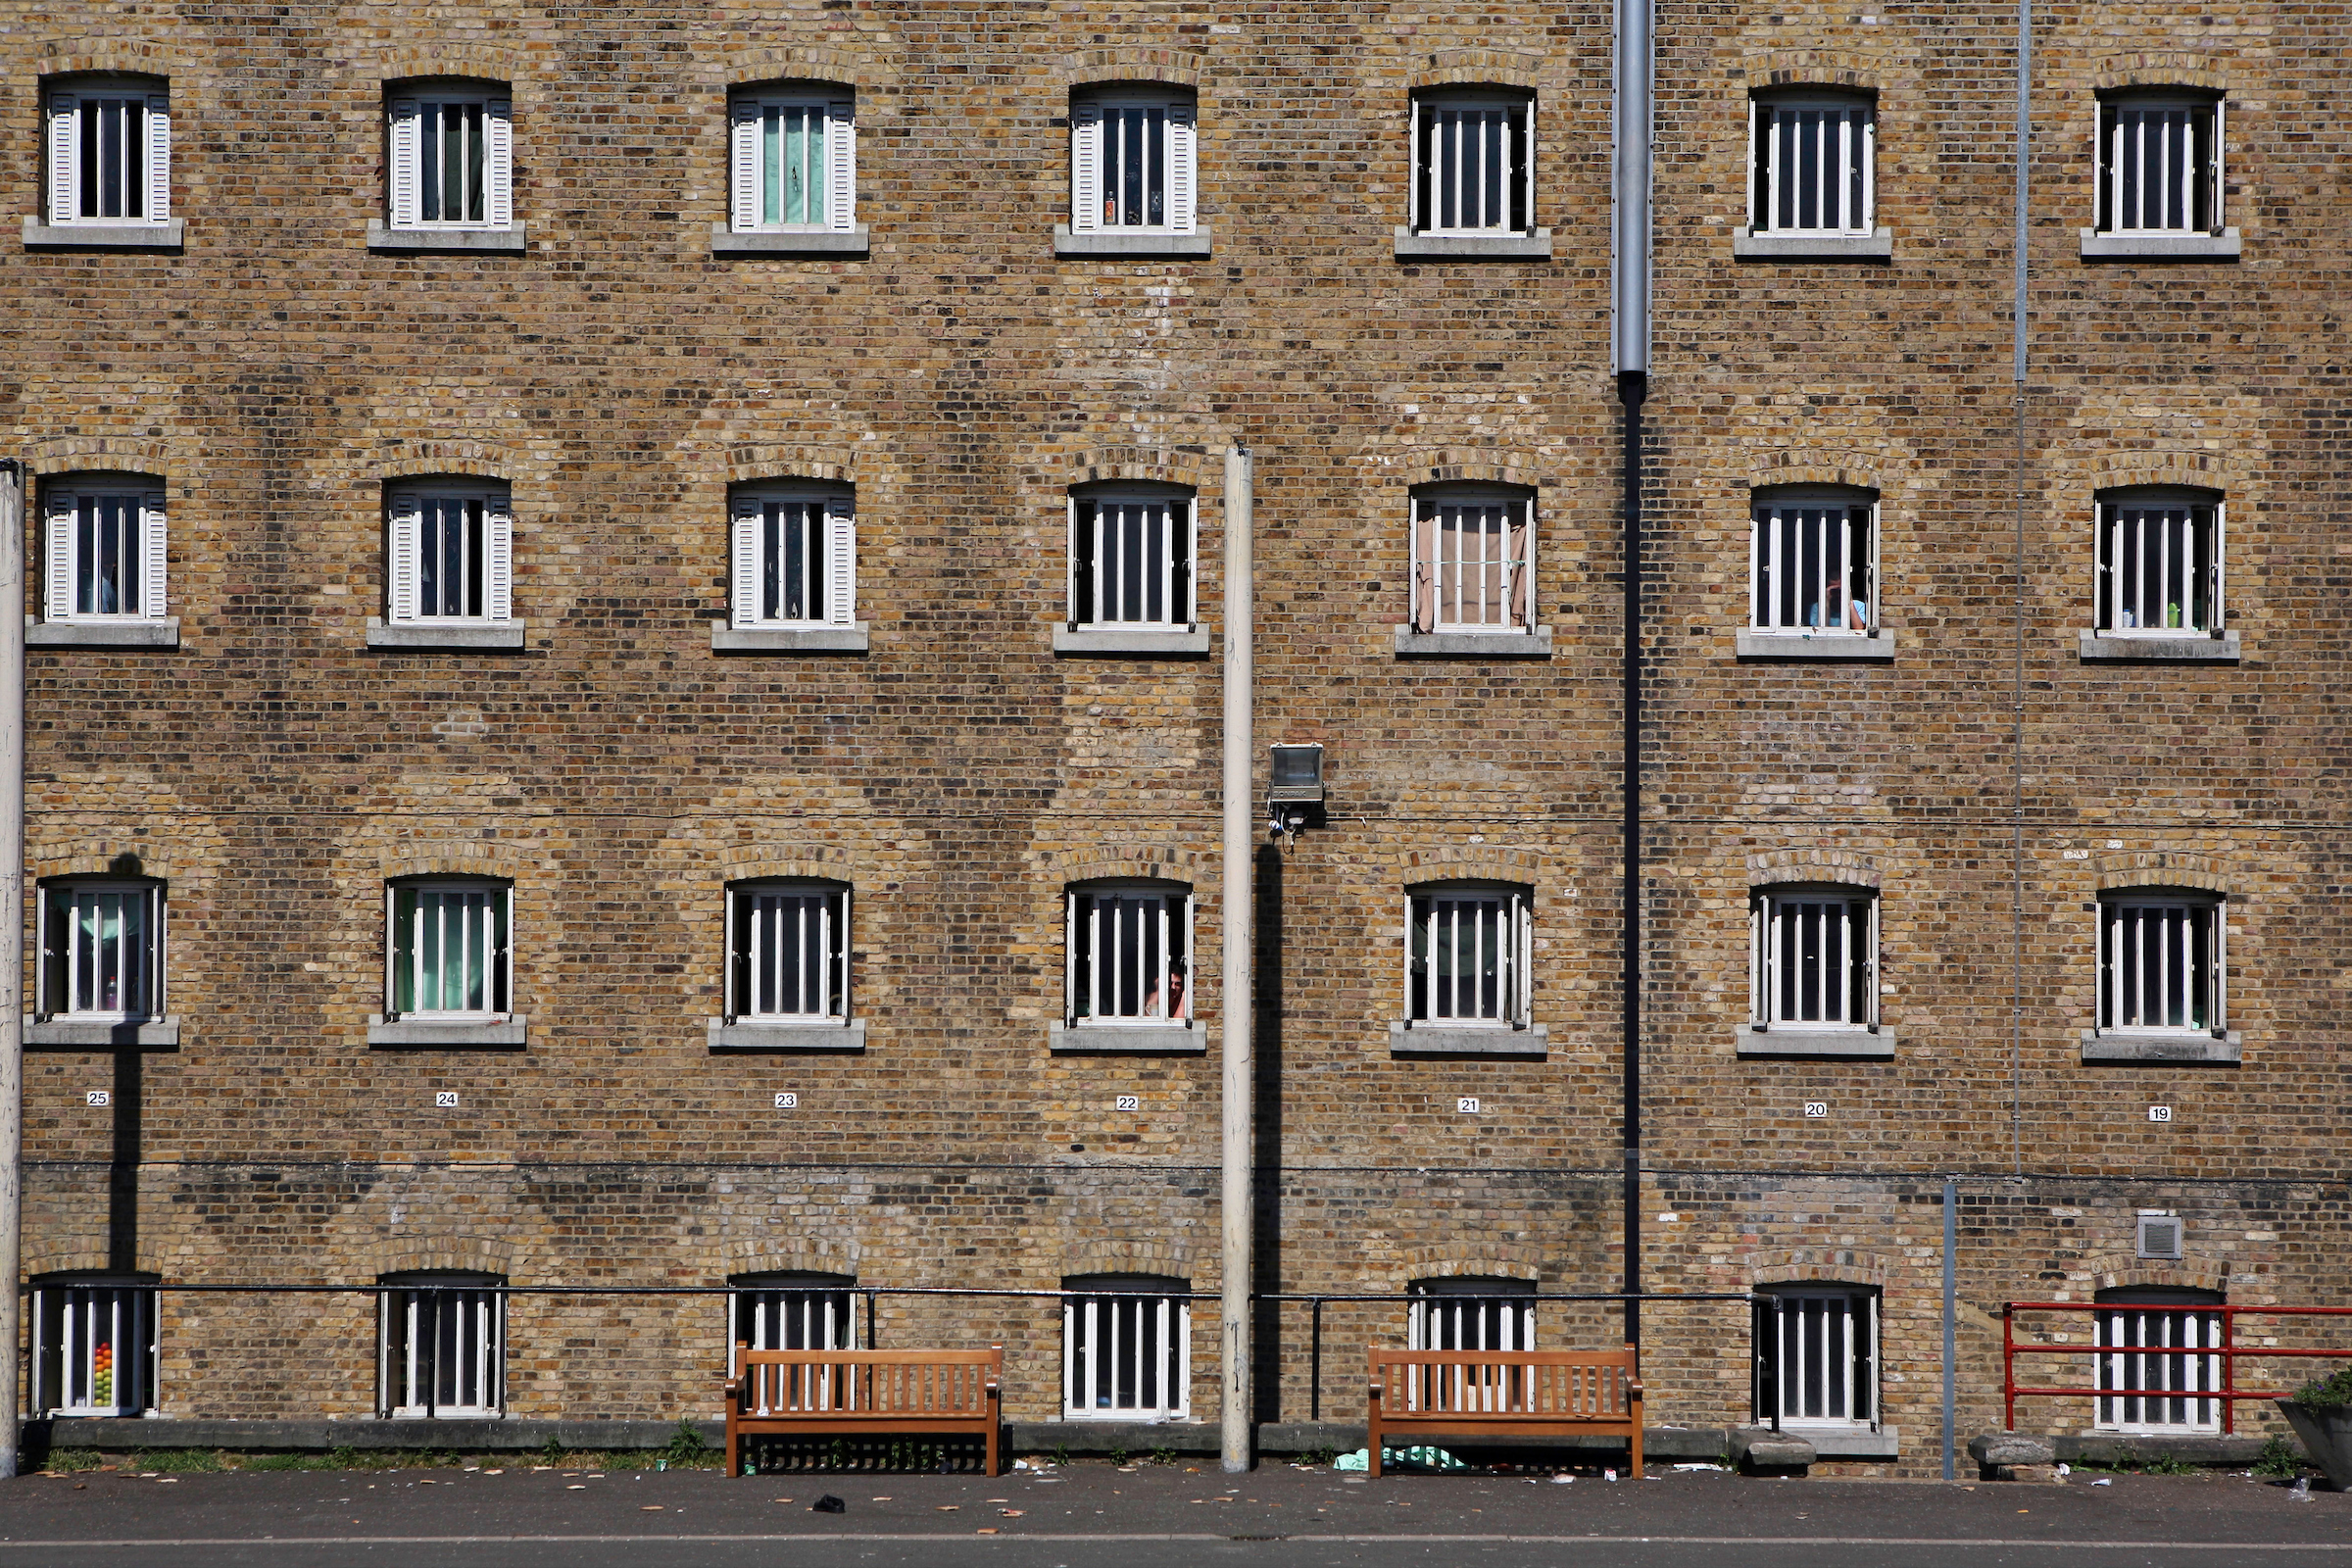 A view of D wing from the exercise yard at Wandsworth Prison..HMP Wandsworth in South West London was built in 1851 and is one of the largest prisons in Western Europe. It has a capacity of 1456 prisoners.